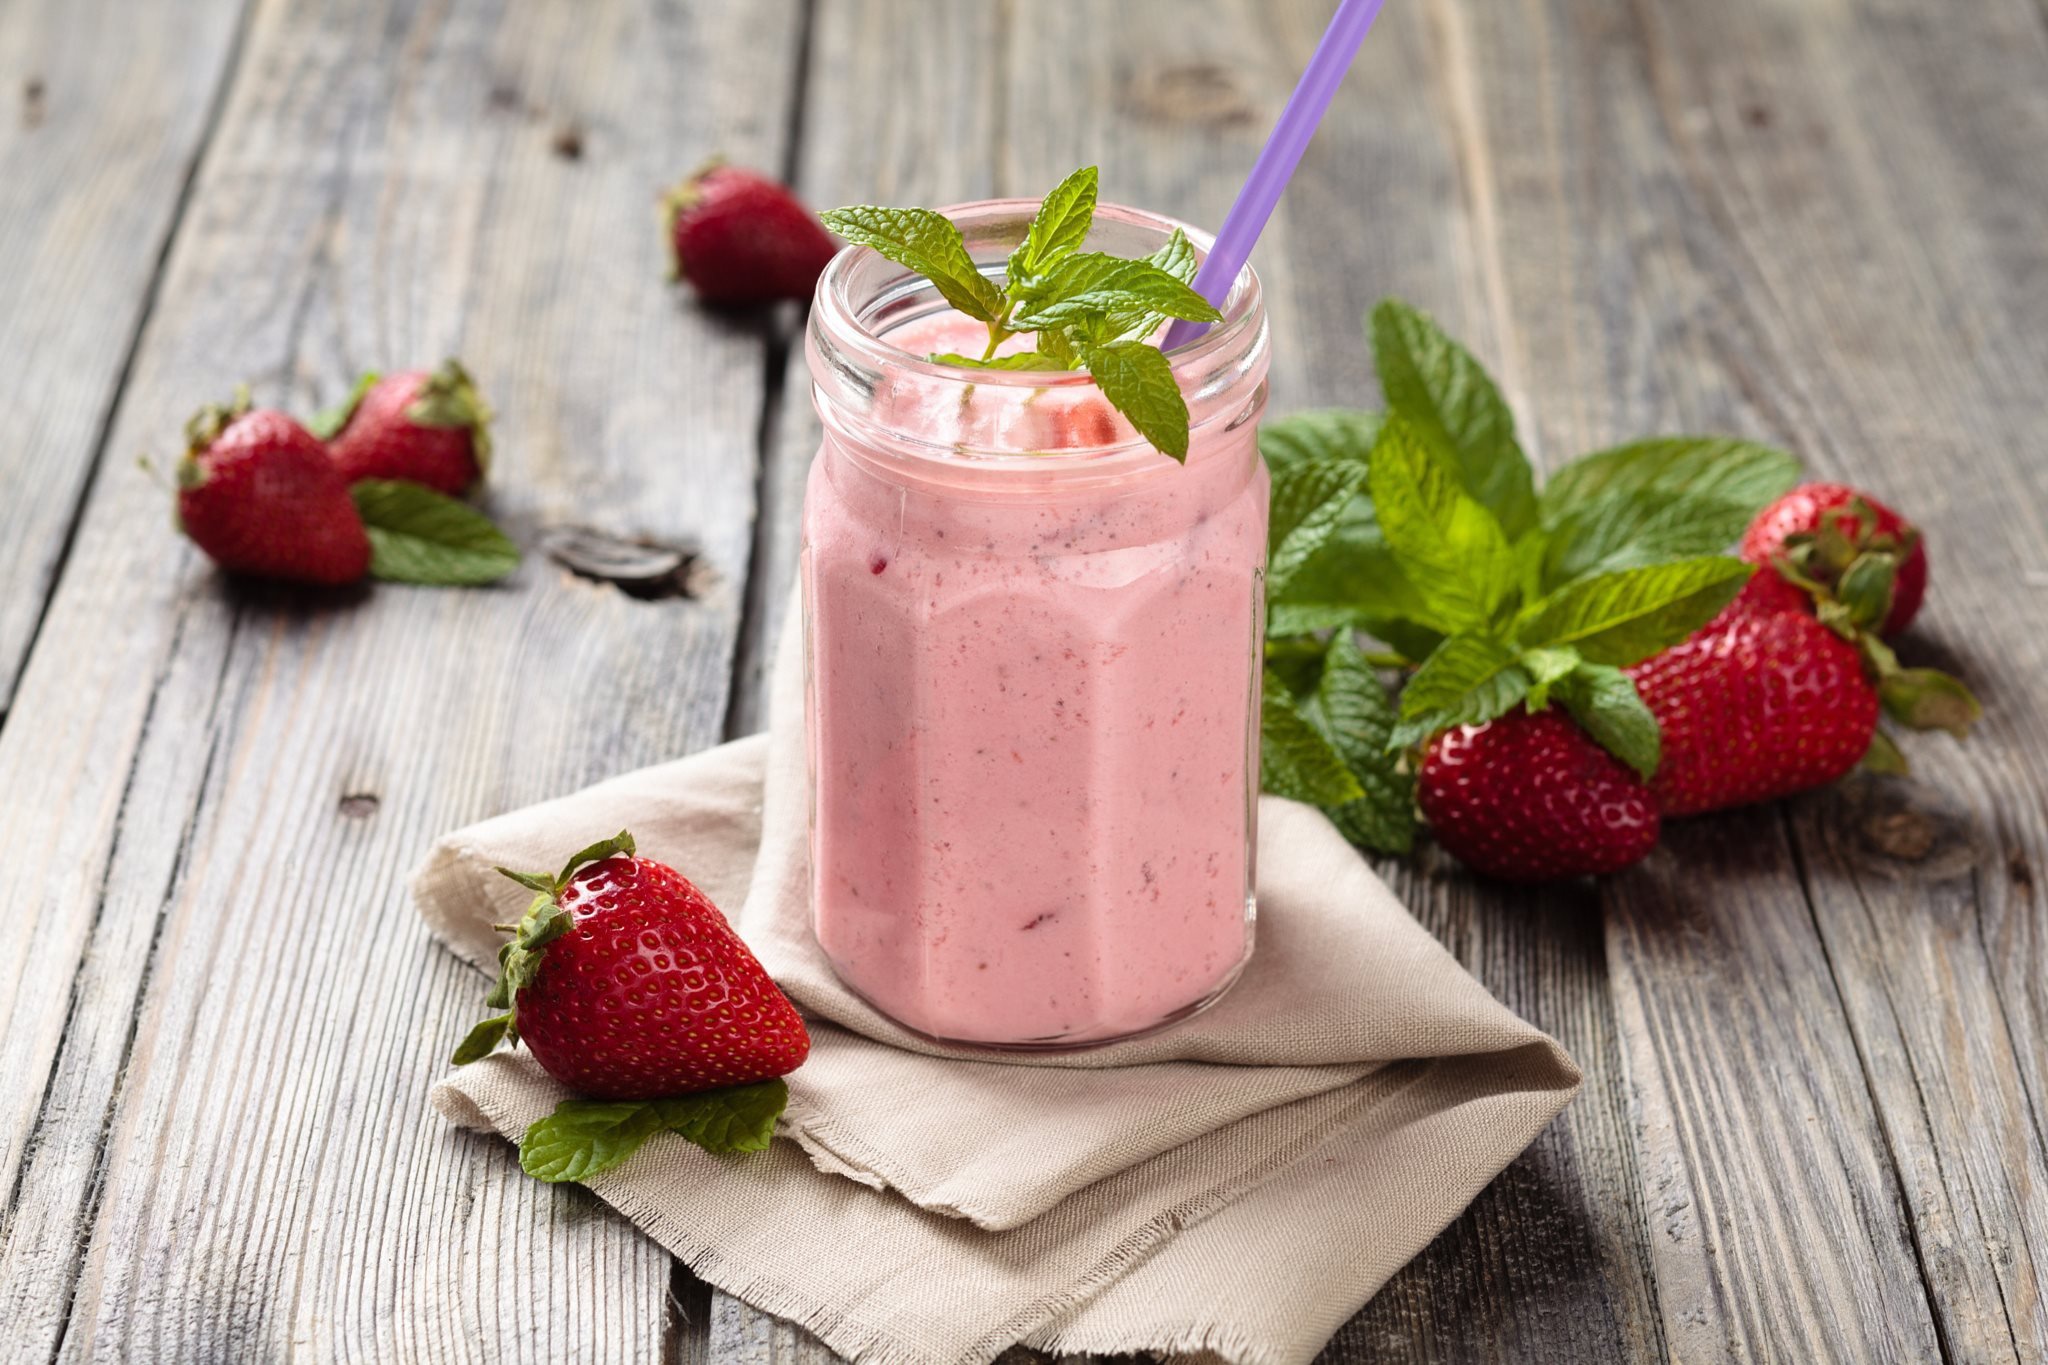 General 2048x1365 food strawberries closeup wooden surface mint leaves fruit depth of field wood drinking straw napkin glass jar smoothie drink